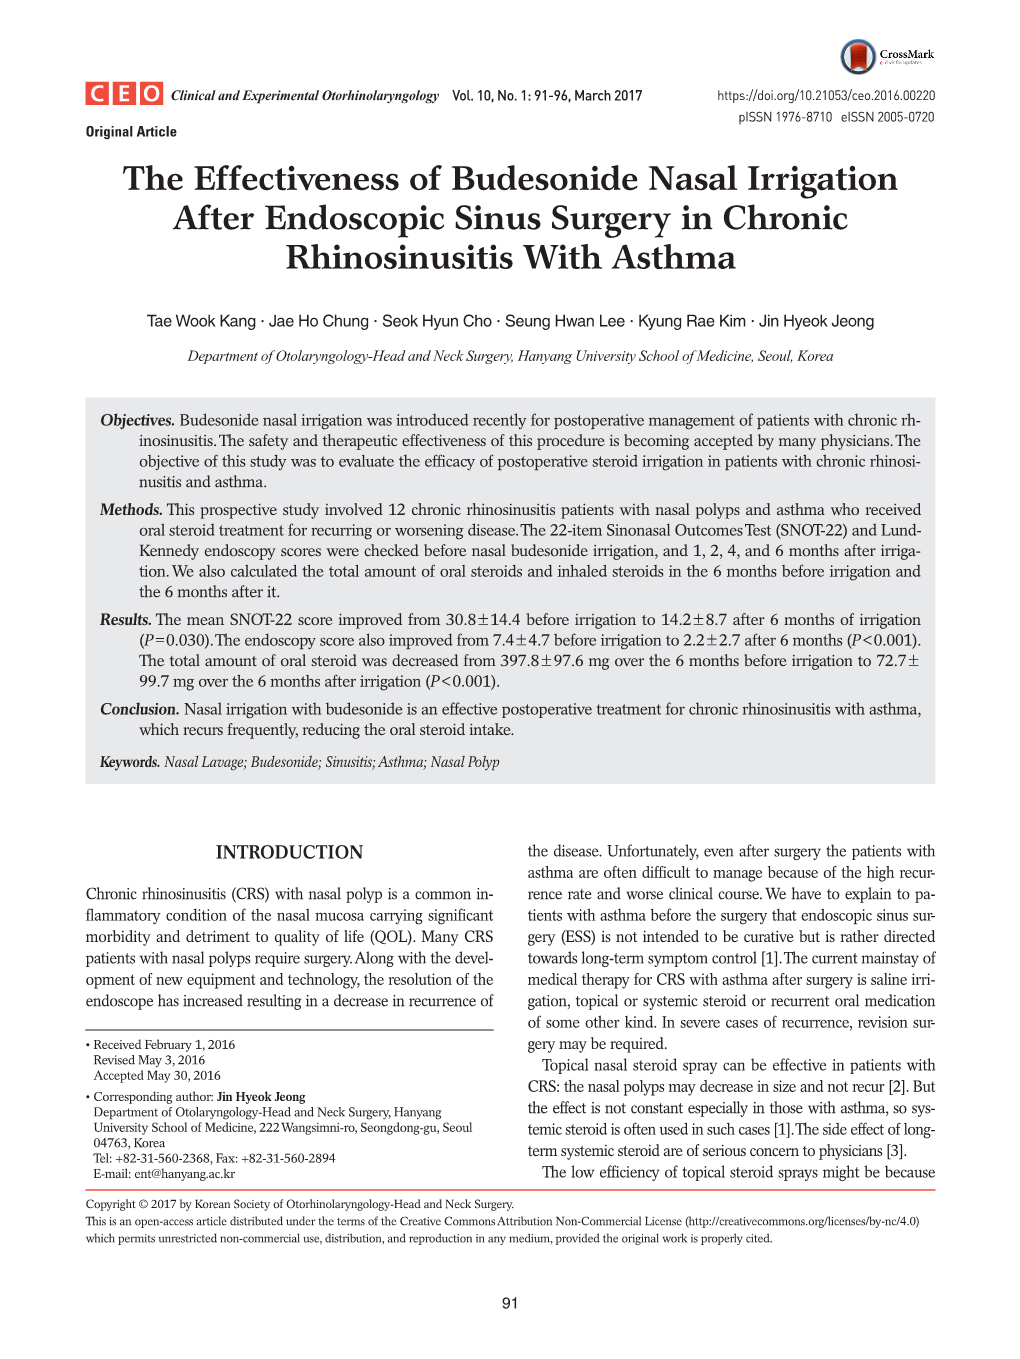 The Effectiveness of Budesonide Nasal Irrigation After Endoscopic Sinus Surgery in Chronic Rhinosinusitis with Asthma